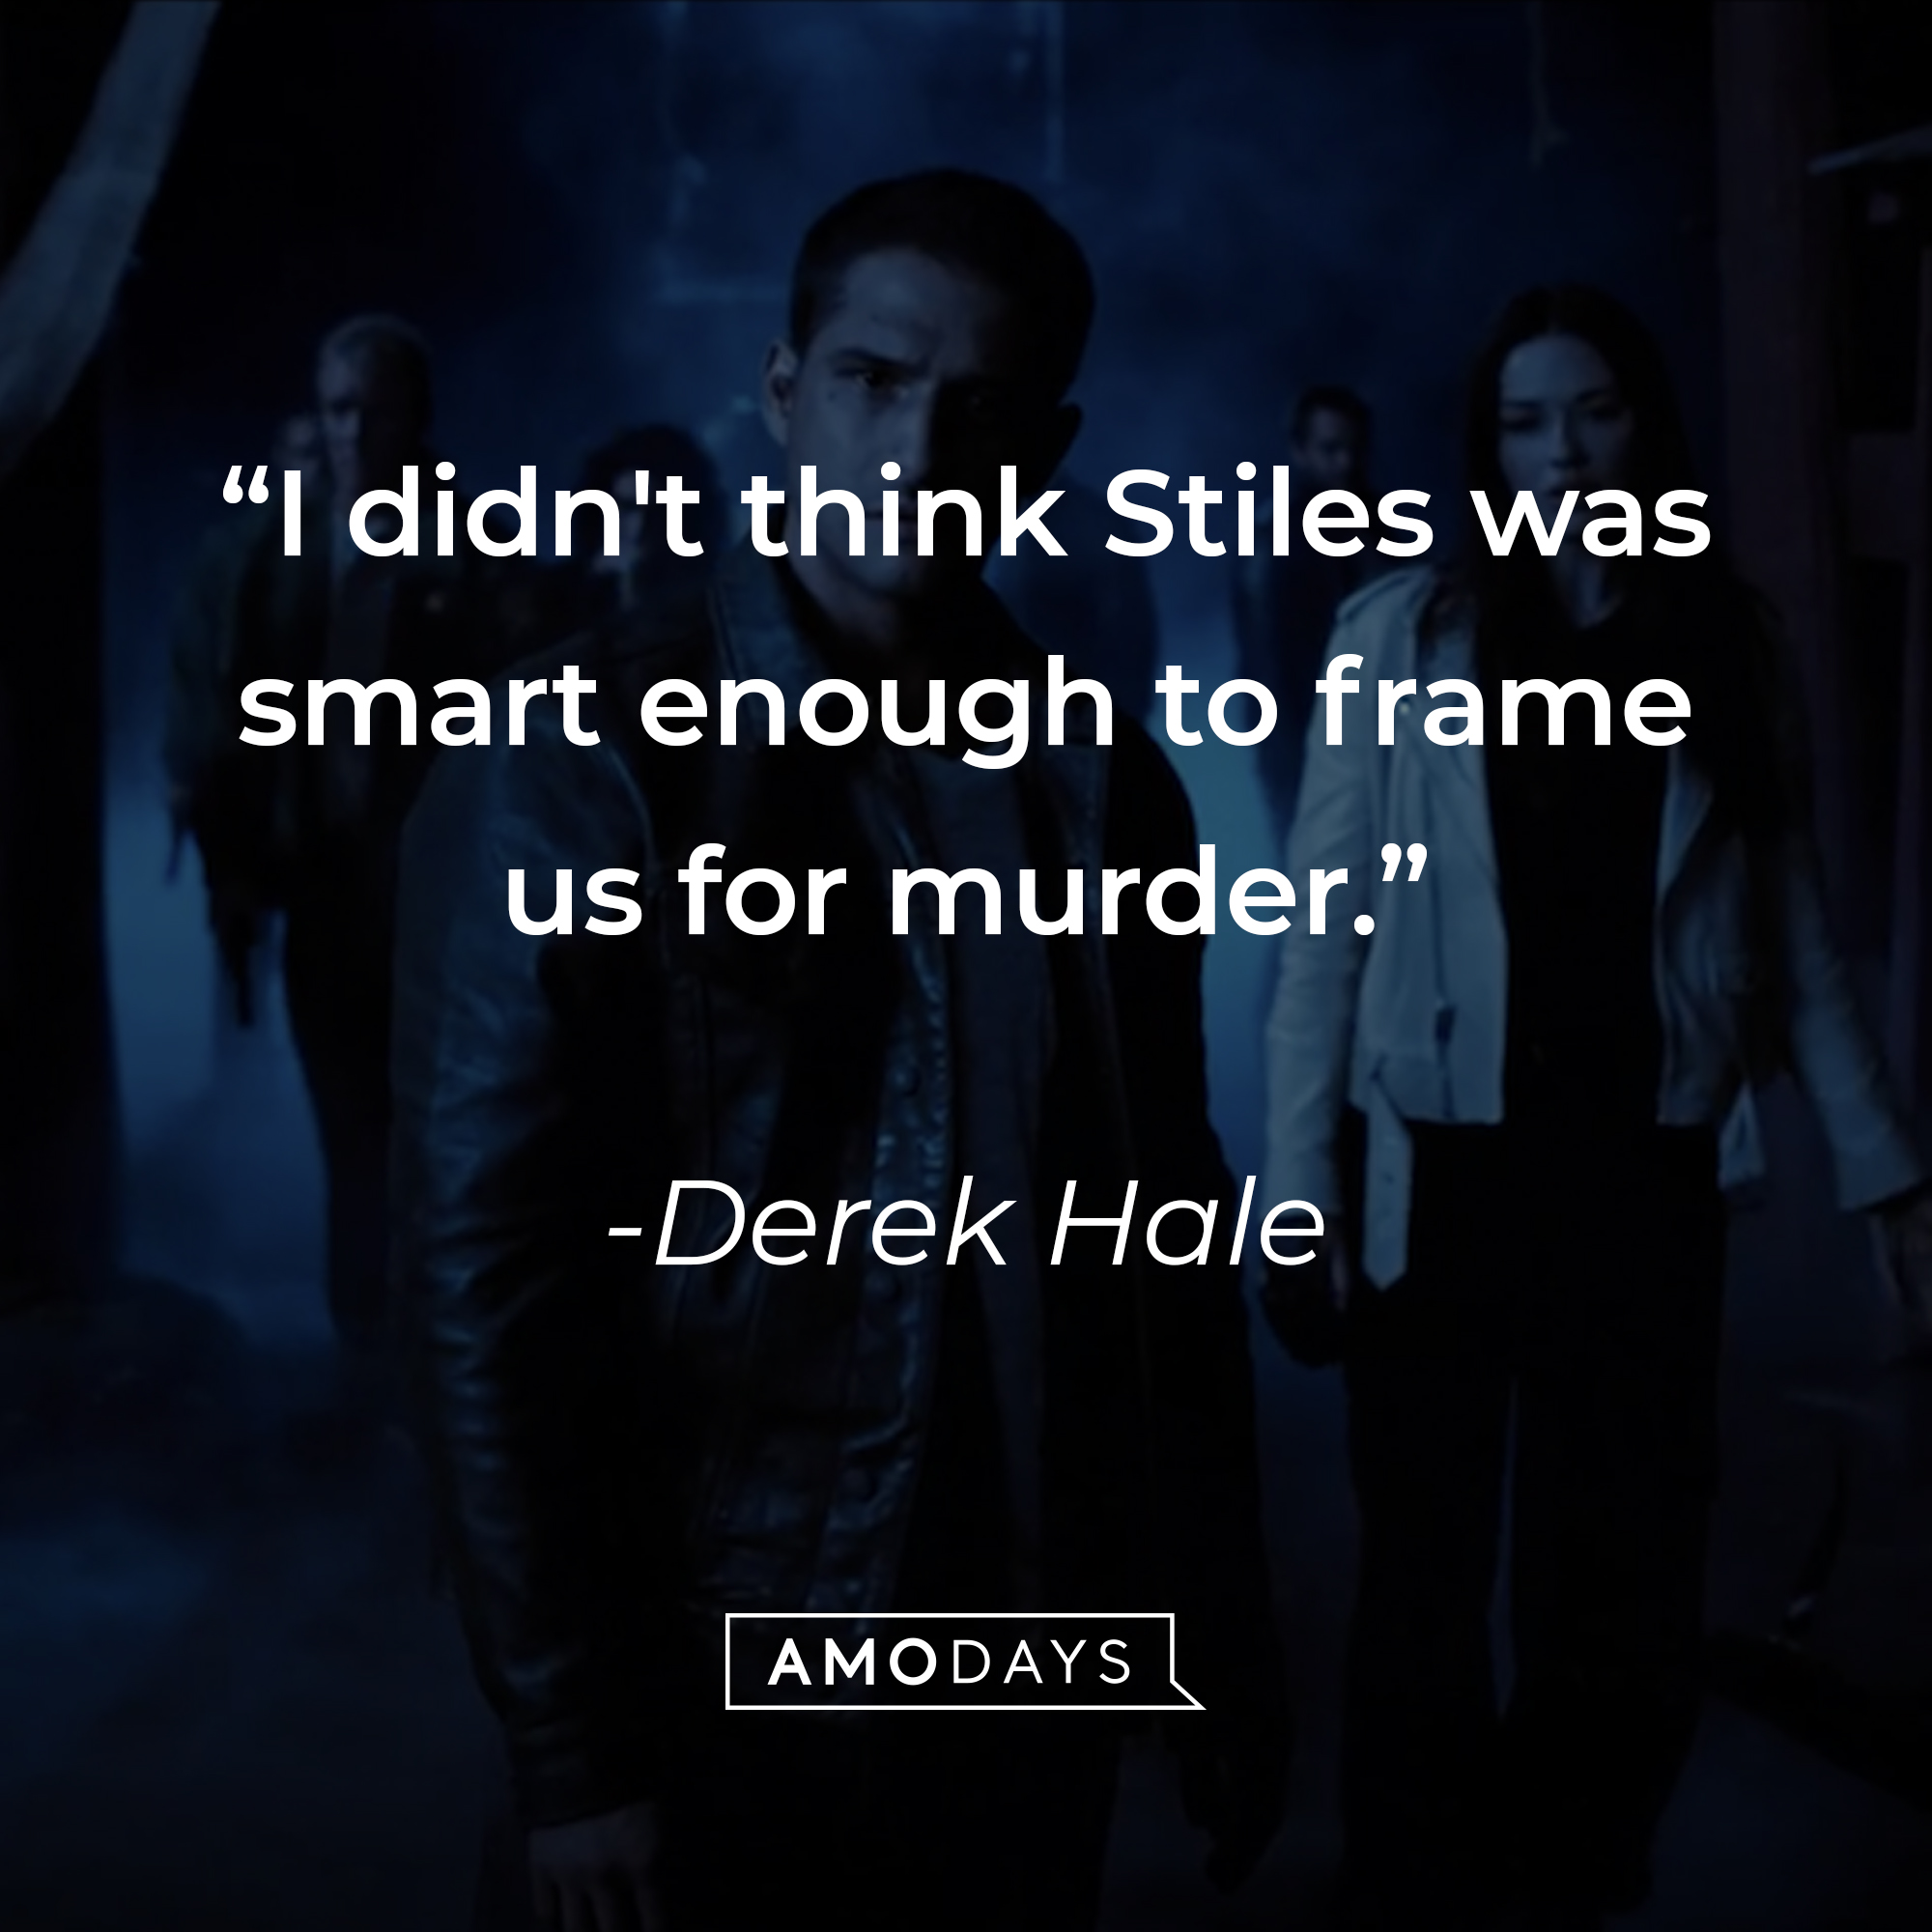 Derek Hale, with his quote: “I didn't think Stiles was smart enough to frame us for murder.” | Source: Amodays